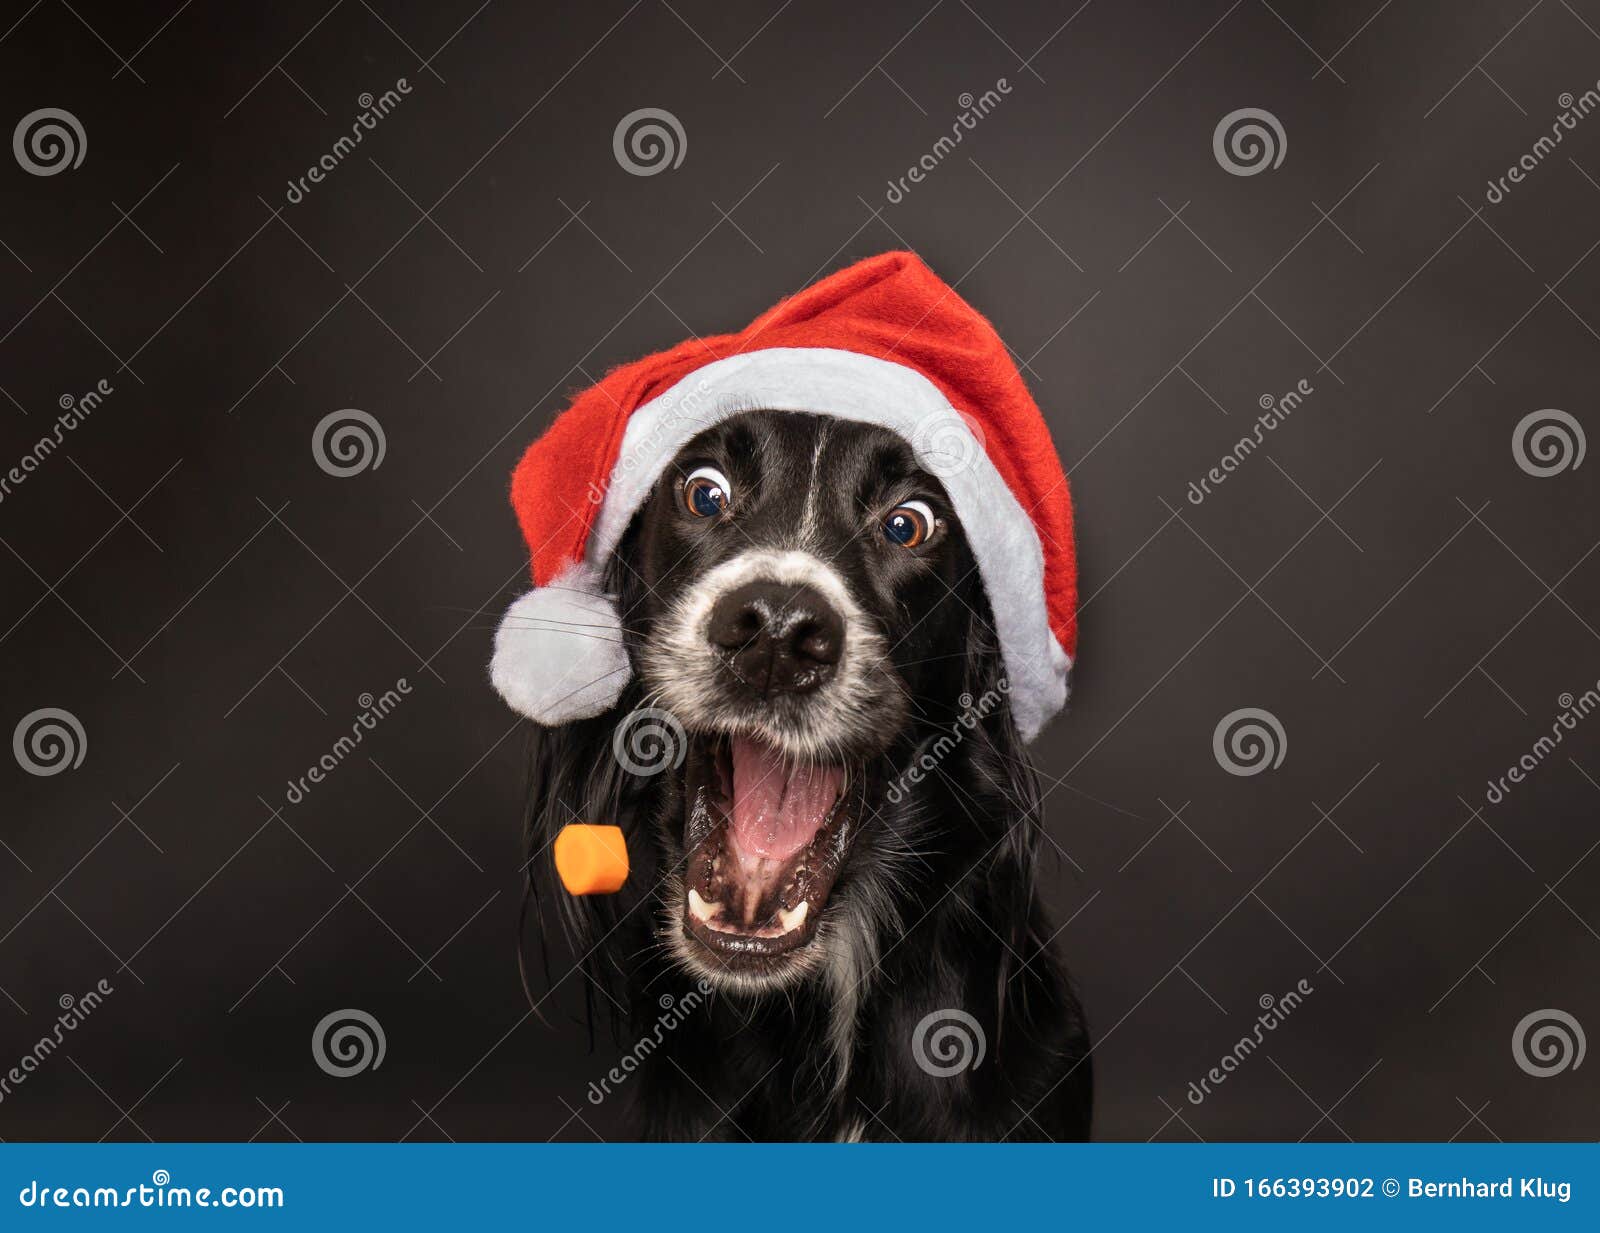 black dog wearing a santa hat and catching a treat